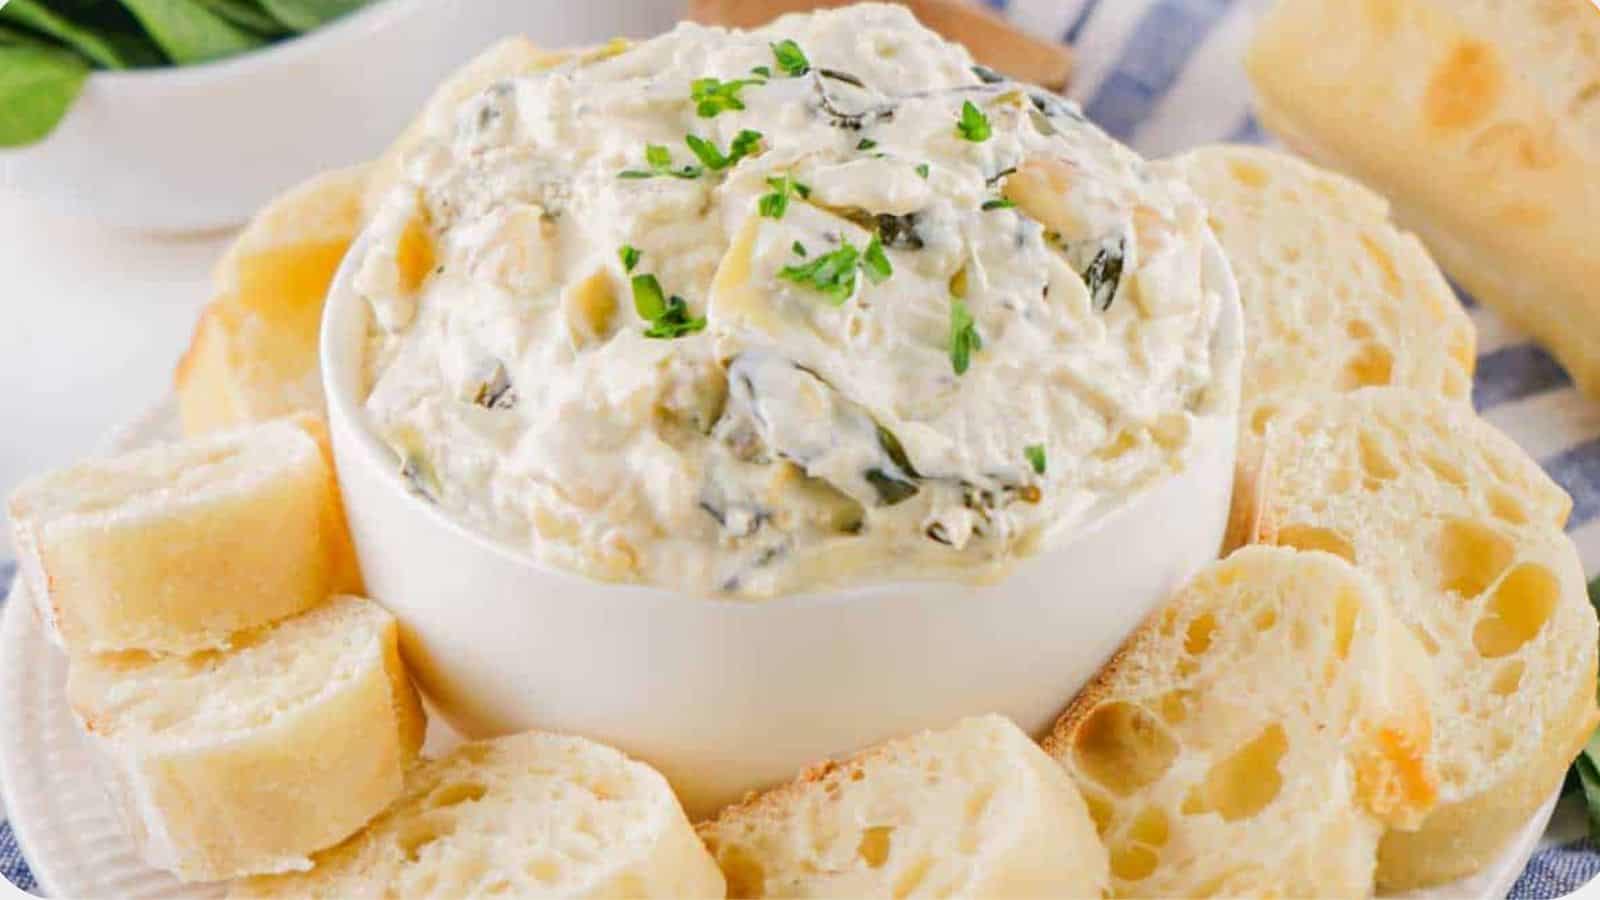 A bowl of creamy spinach dip garnished with herbs, surrounded by slices of crusty bread on a blue patterned cloth.